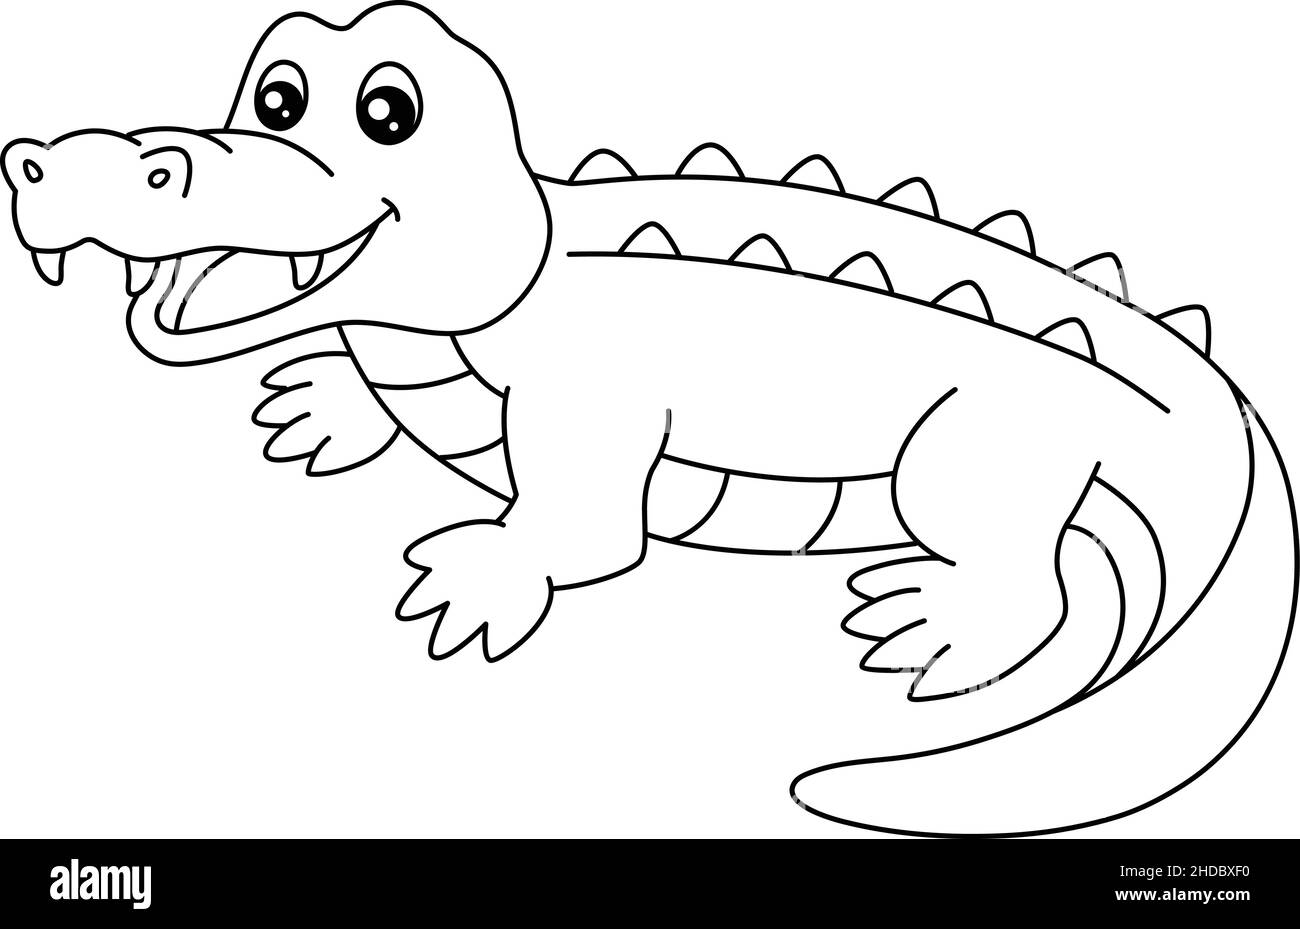 Crocodile Coloring Page Isolated for Kids Stock Vector Image & Art - Alamy